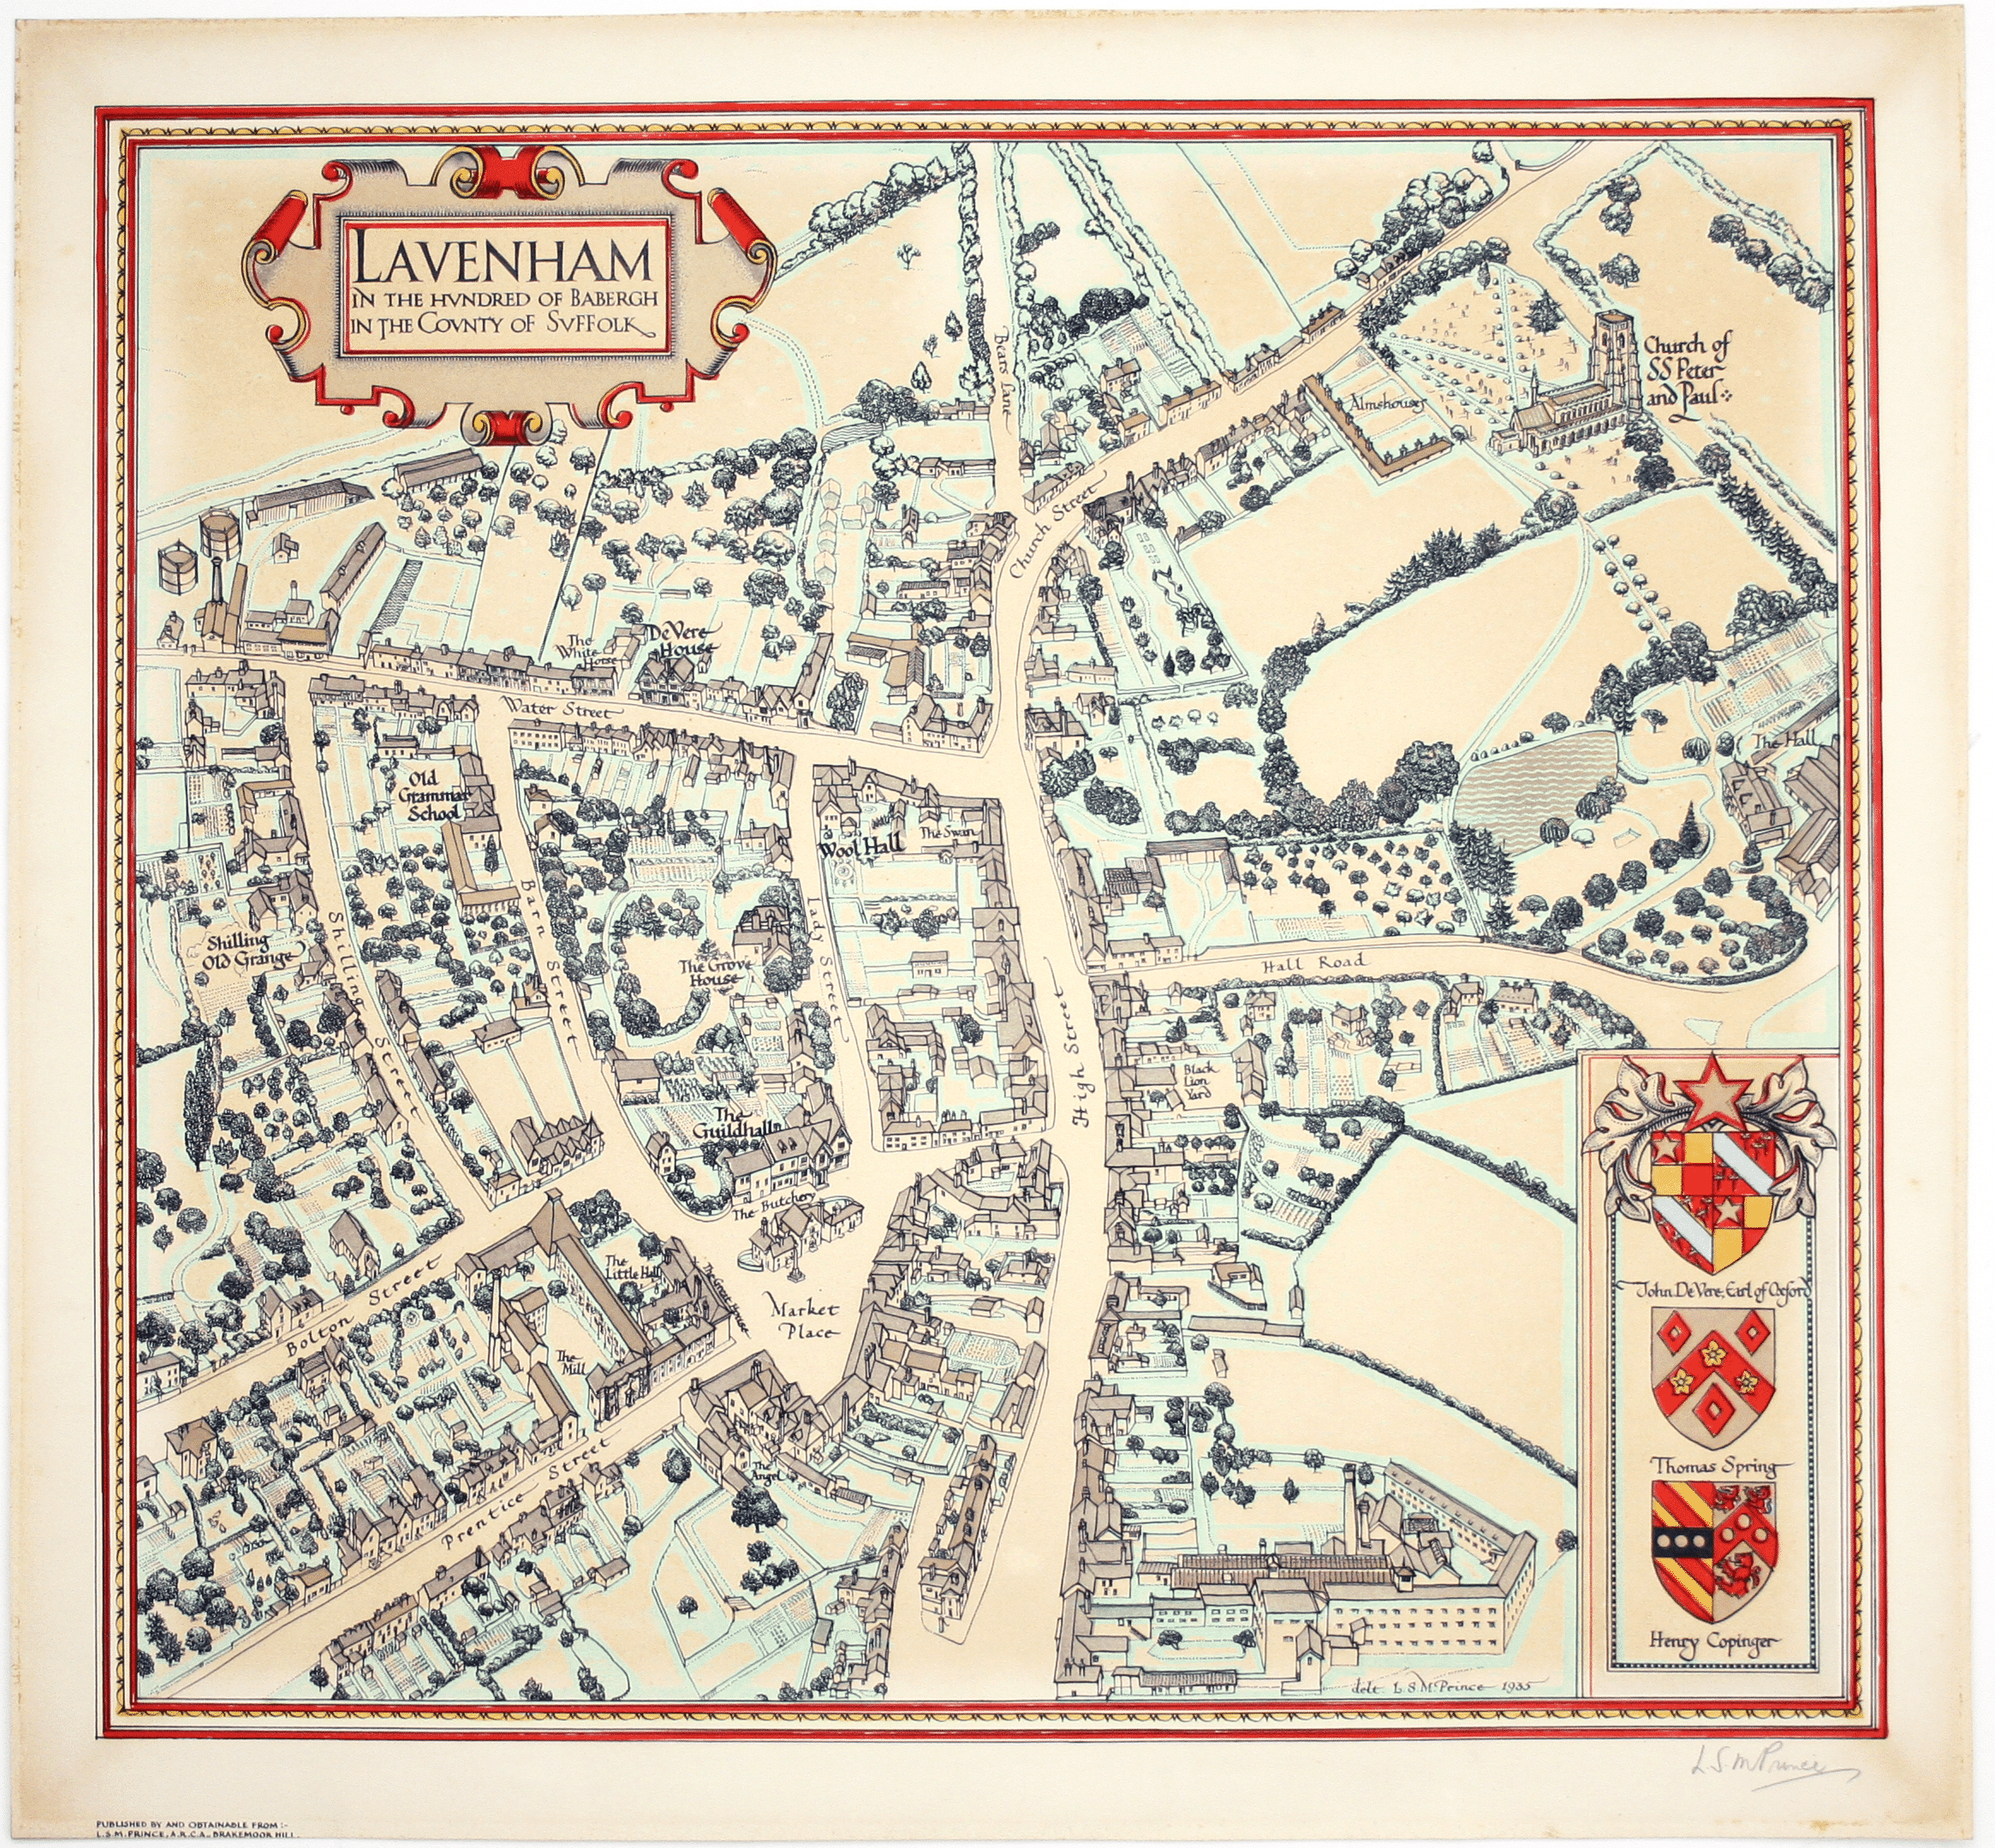 Prince’s Pictorial Map of Lavenham